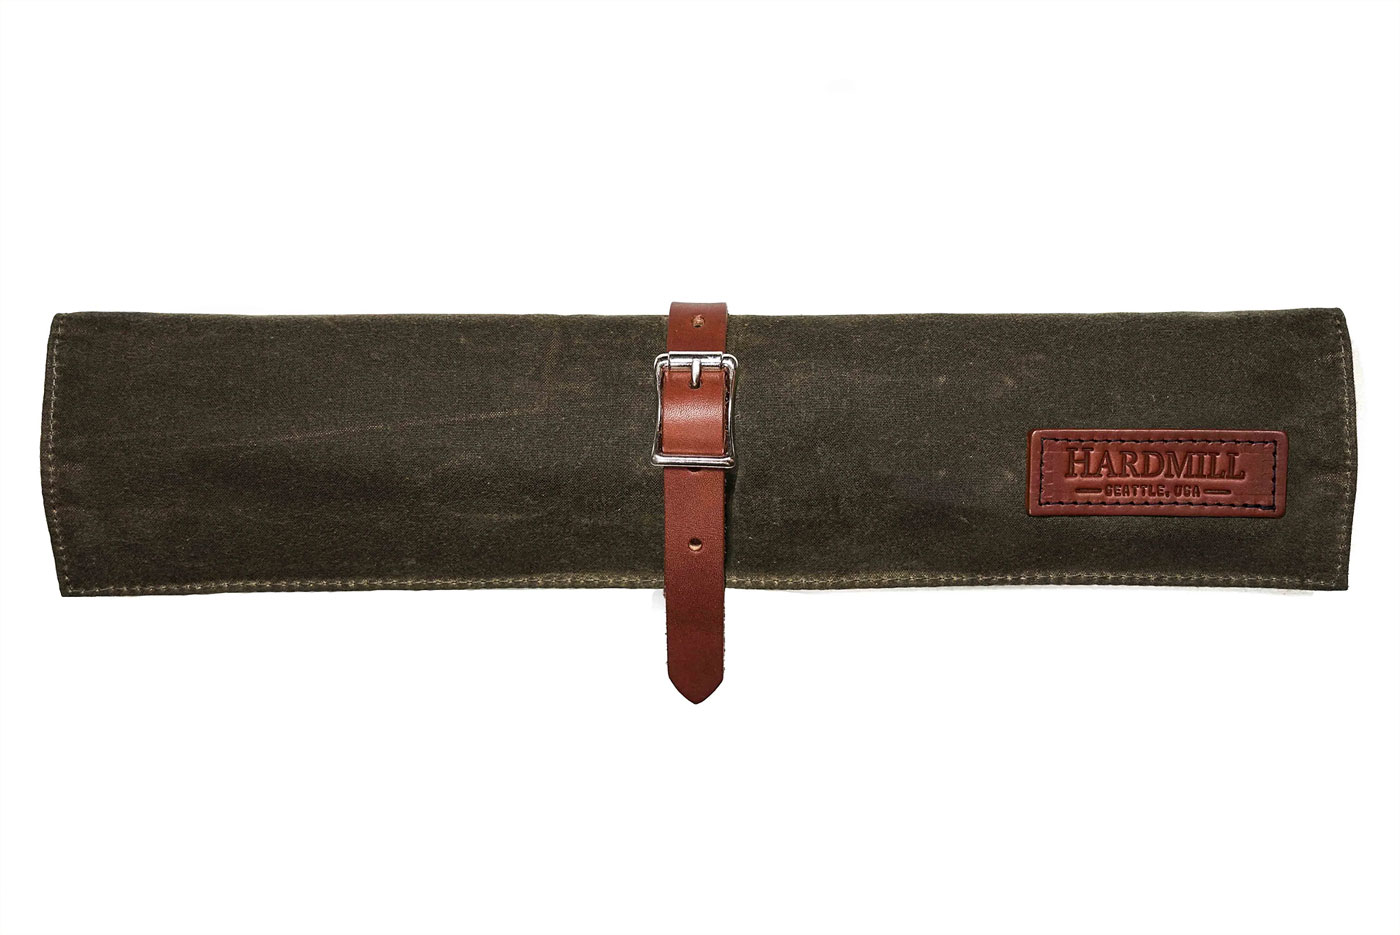 4 Pocket Waxed Canvas Compact Knife Roll with Leather Trim - Dark Oak (CK-WC-DK)